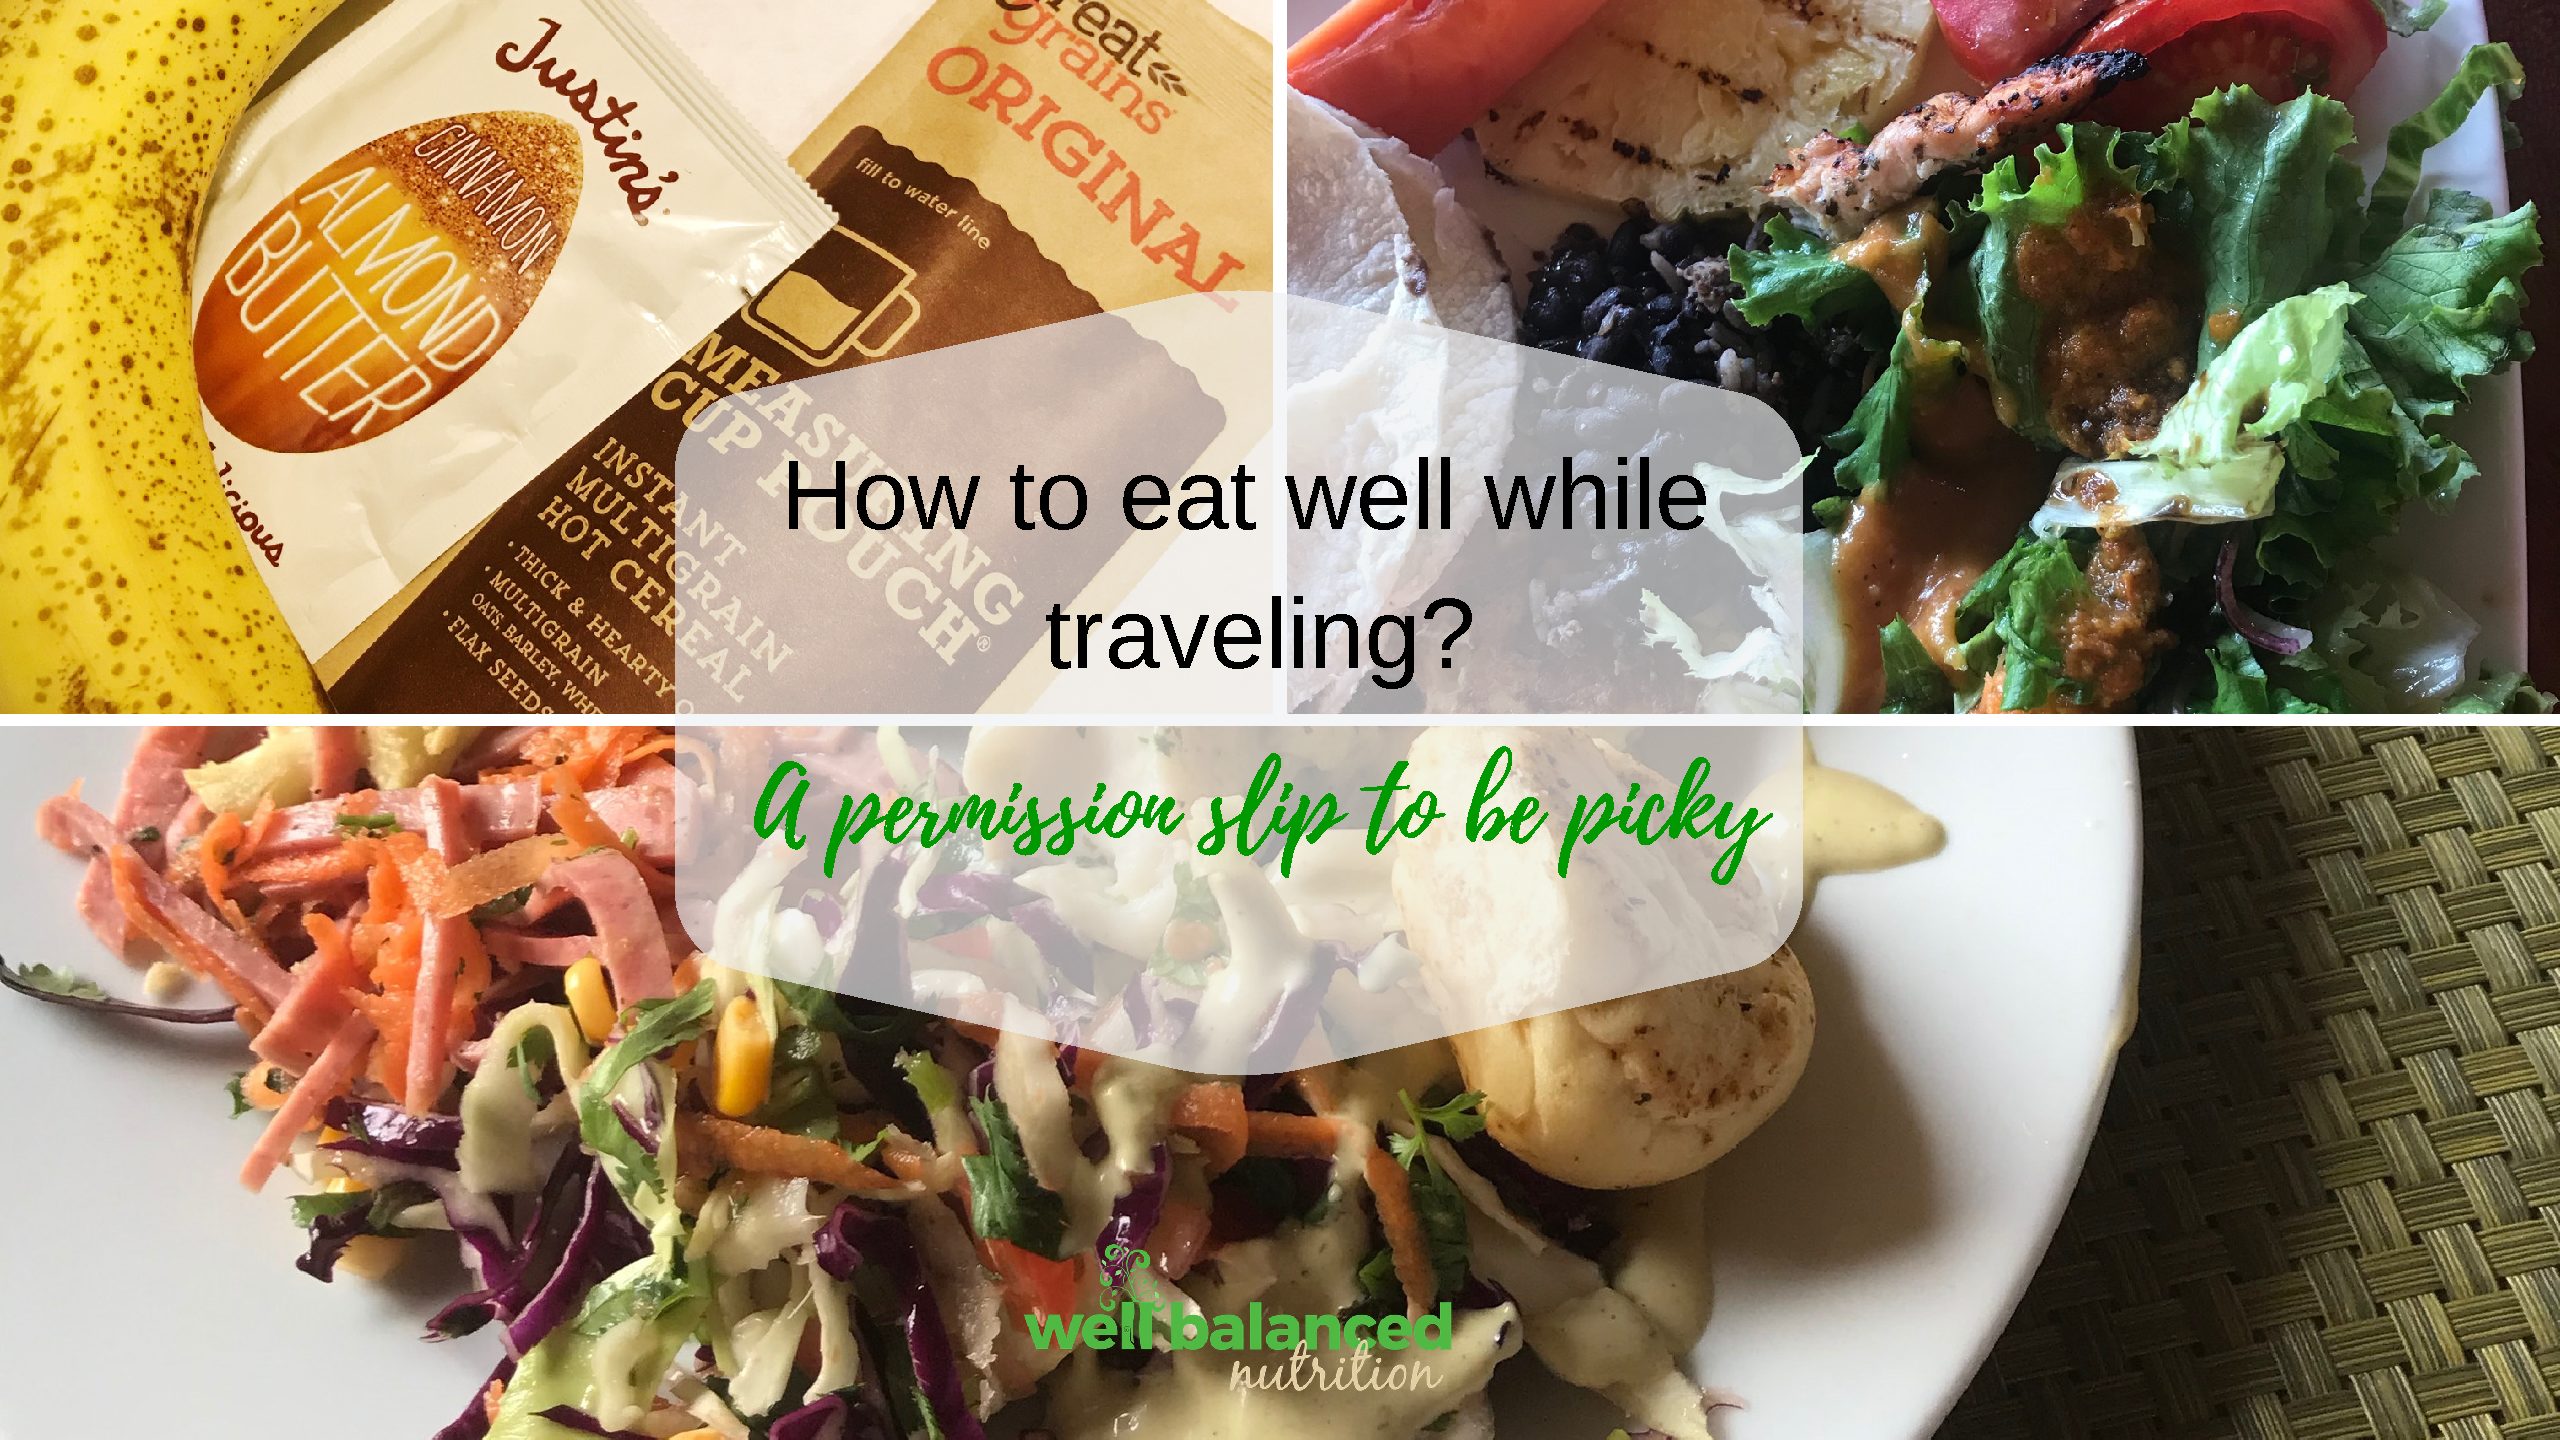 How to eat well while traveling? A permission slip to be picky